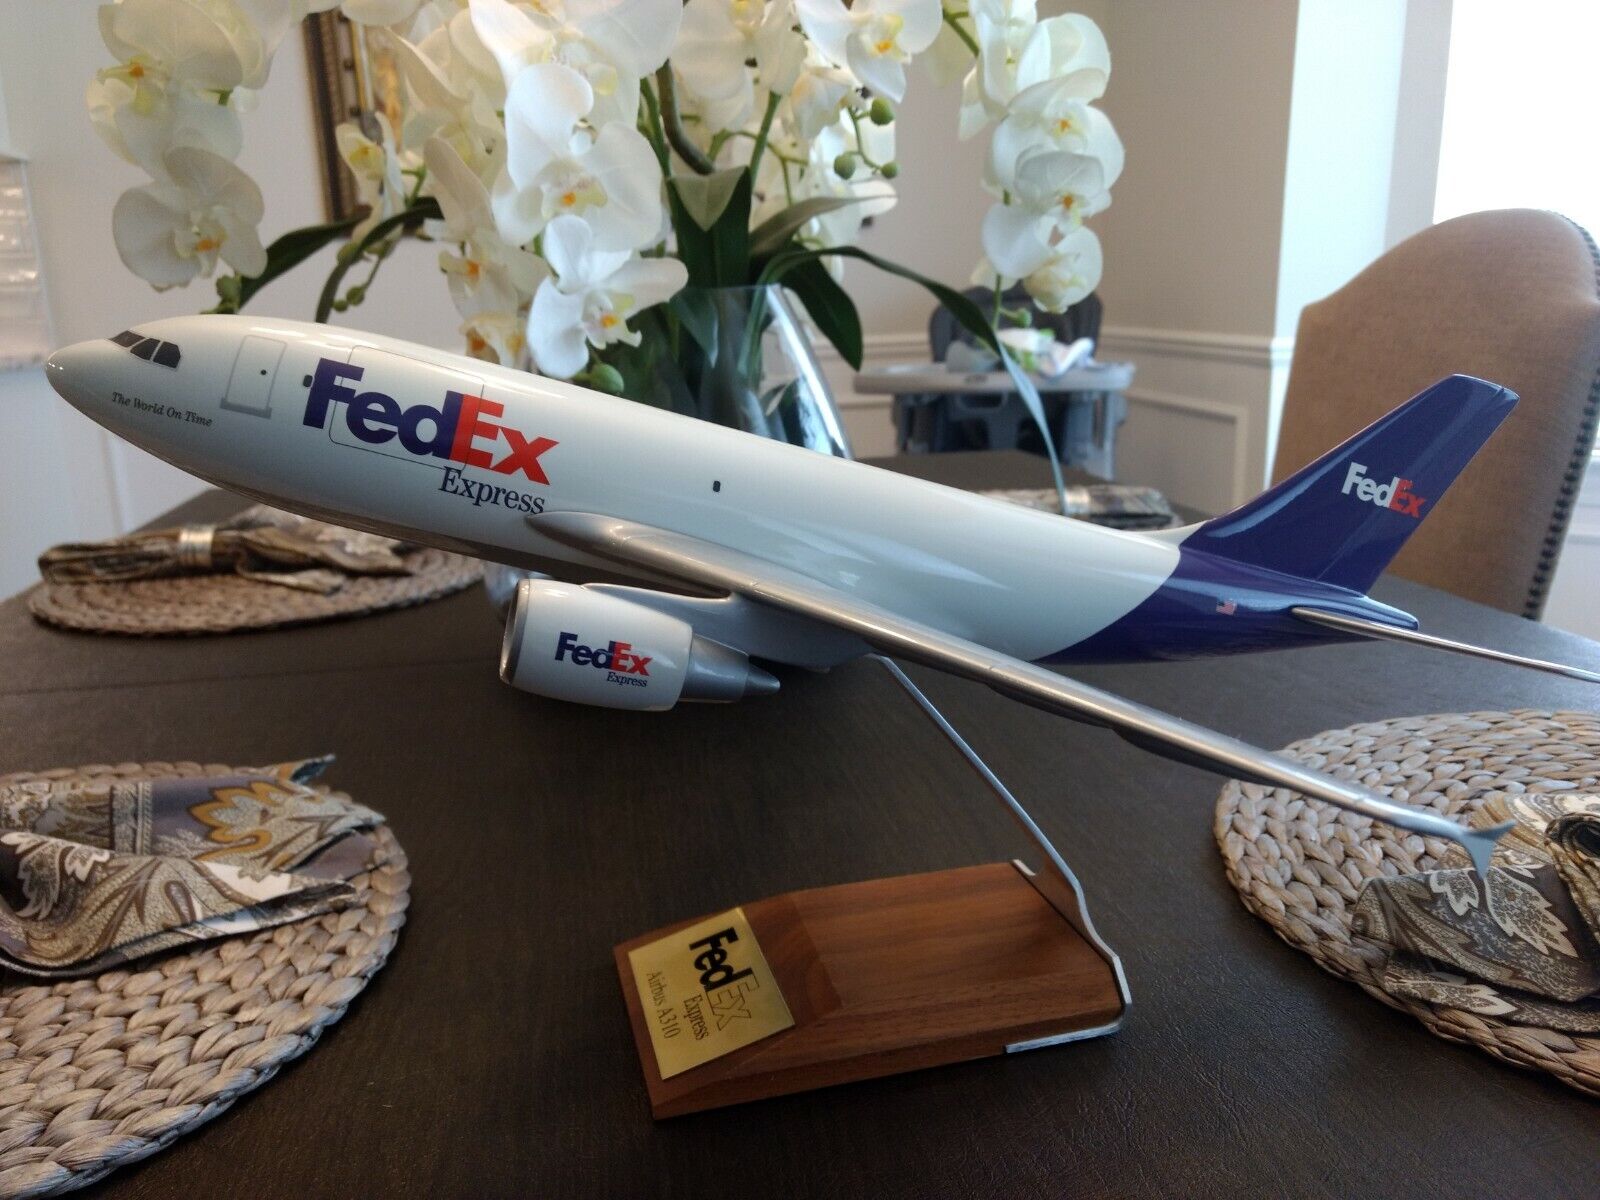 PacMin FedEx Express Airbus 310-300 1/100 Pacific Miniature model airplane